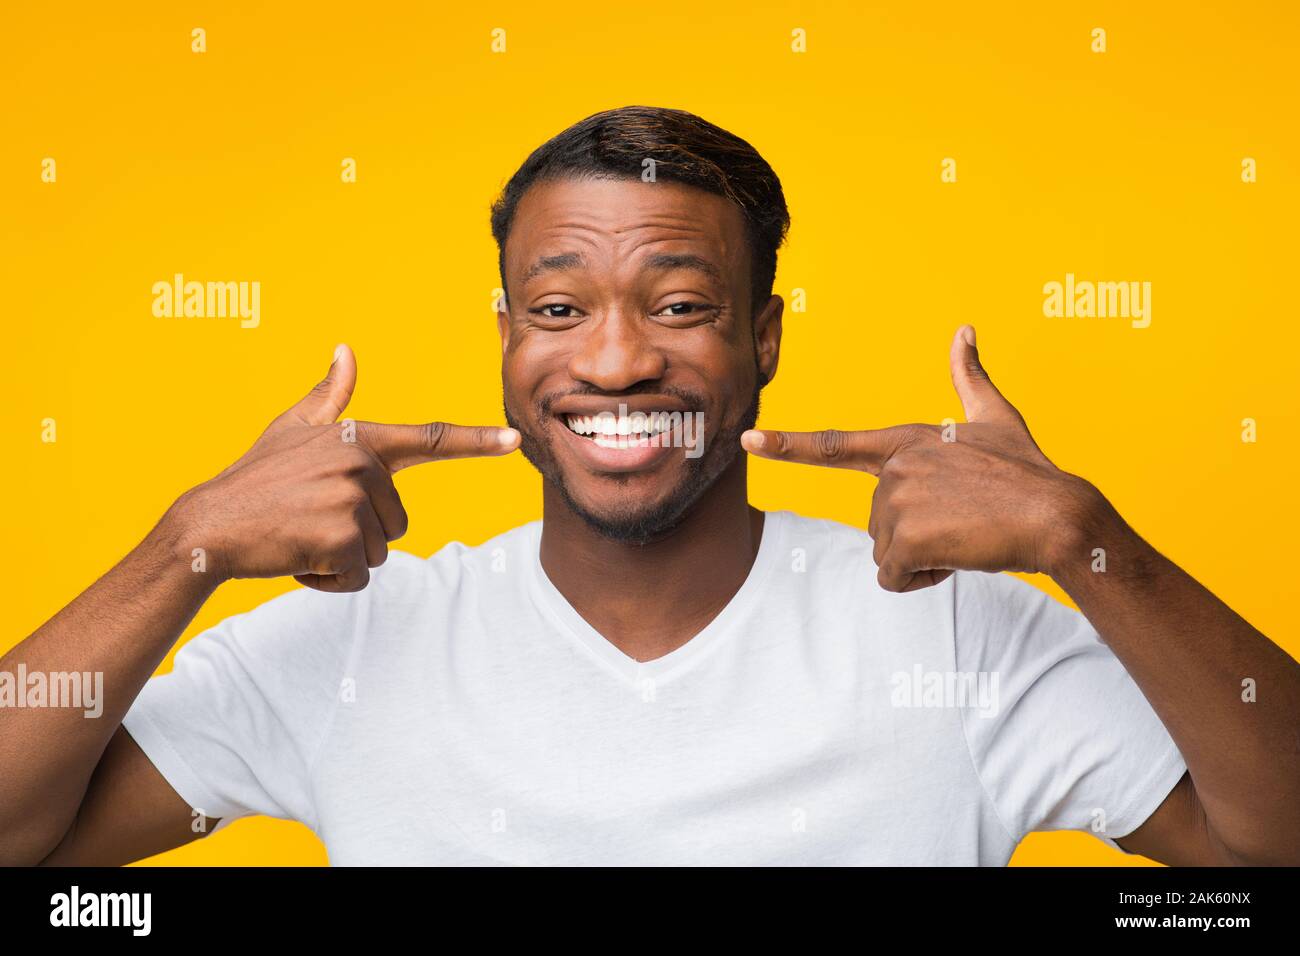 Joyful Afro Man Pointing Fingers At His Perfect White Smile Standing On Yellow Background. Studio Shot Stock Photo